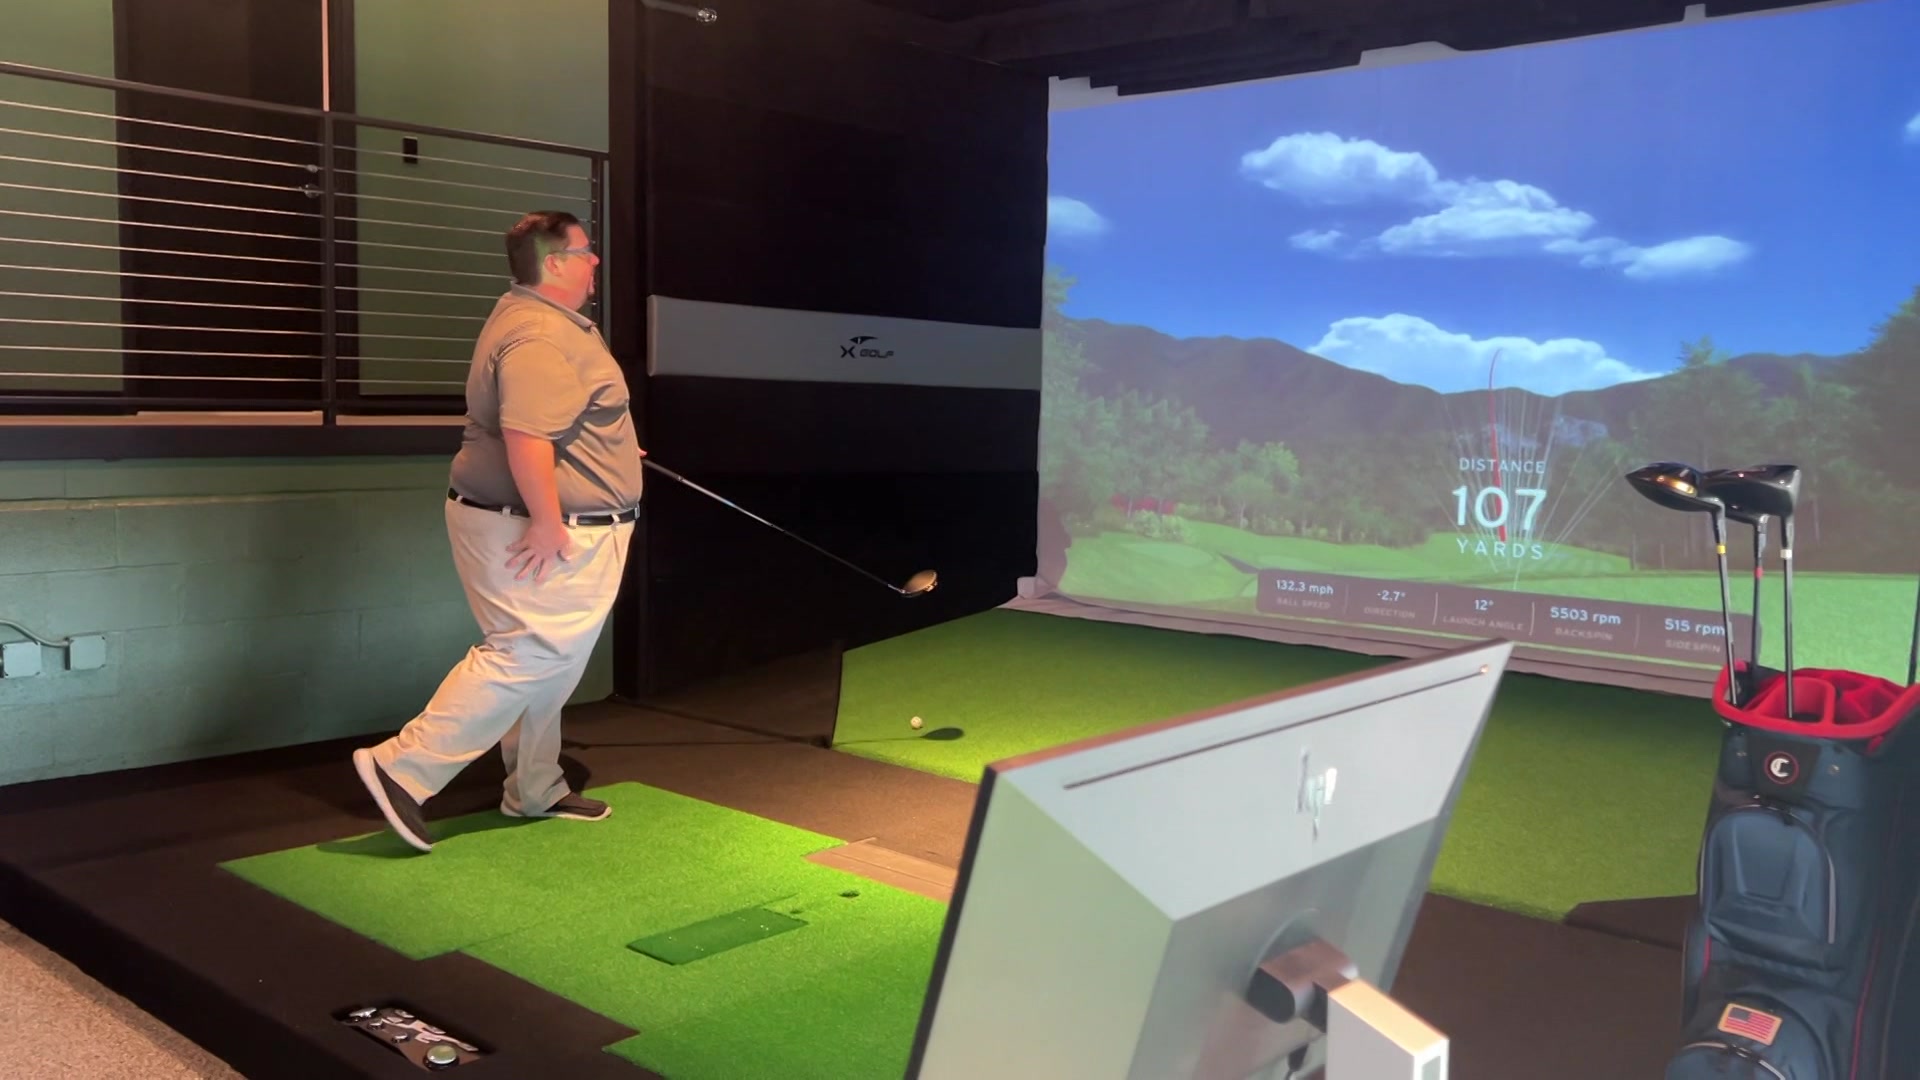 CBS 58 takes a look at the new X-Golf facility inside American Family Field